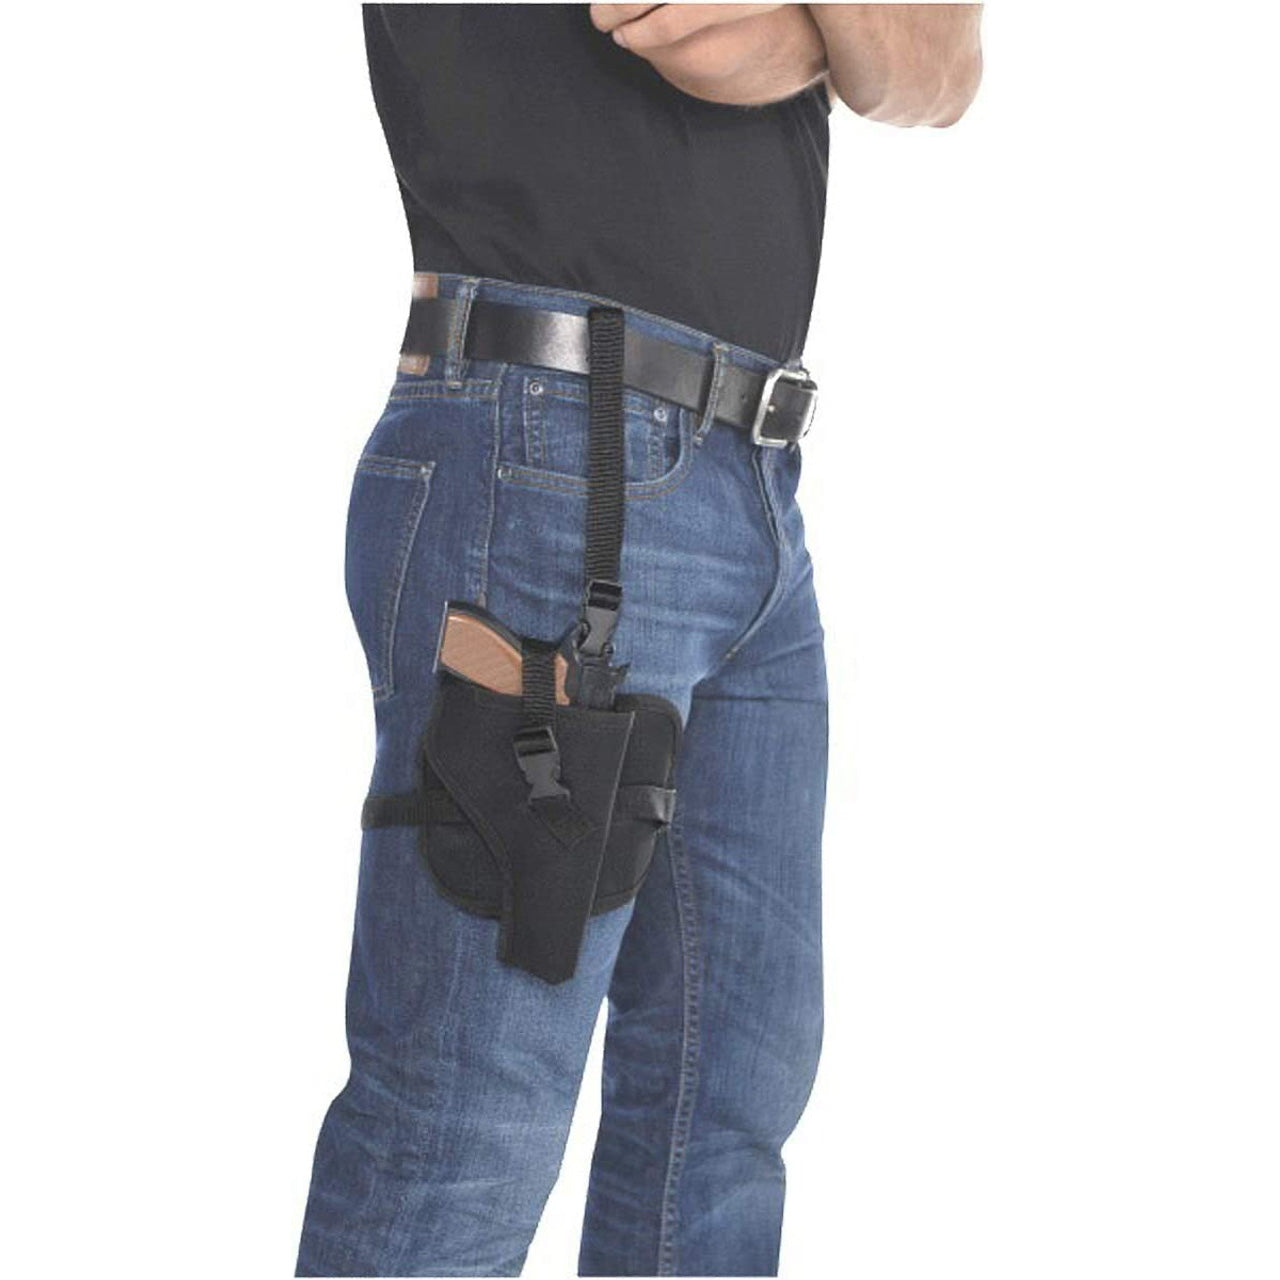 Adult Leg Holster Police Detective Unisex Accessory One Size